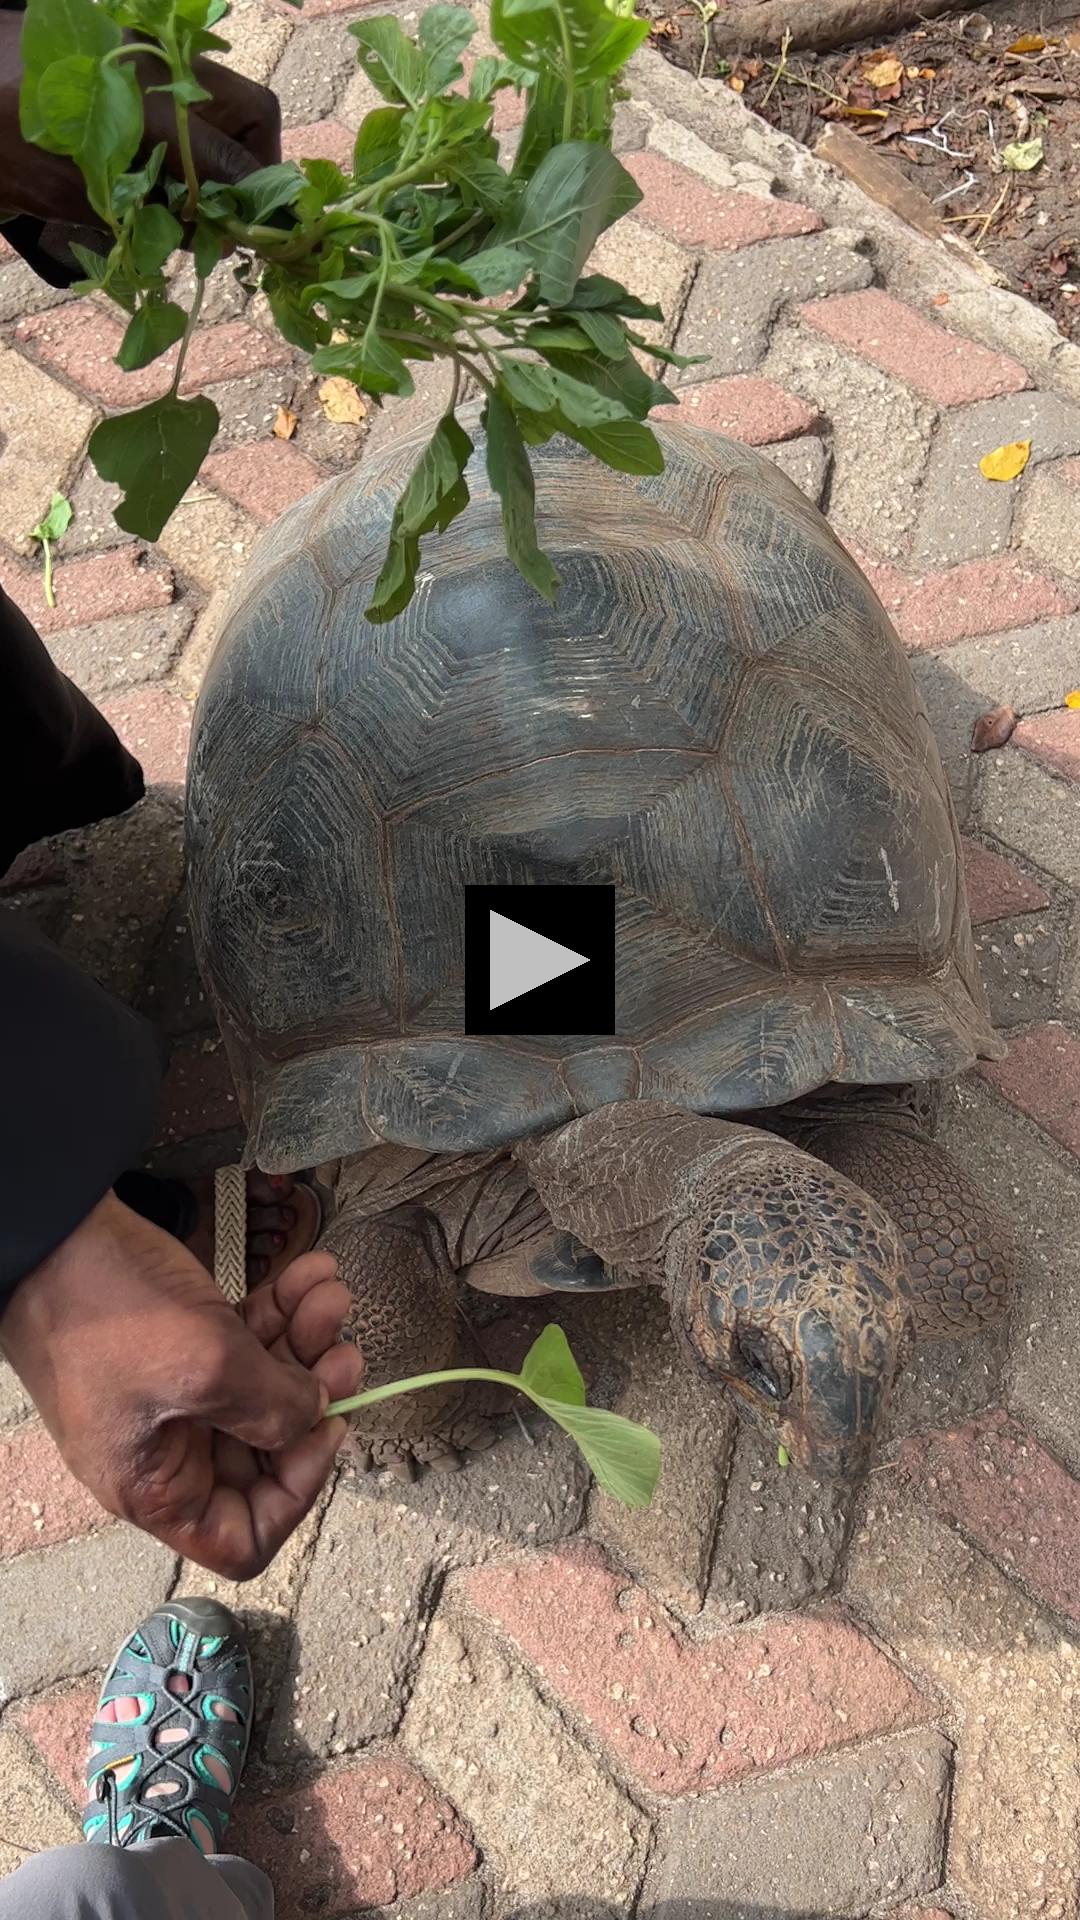 Meal Time for this Aldabra Tortoise